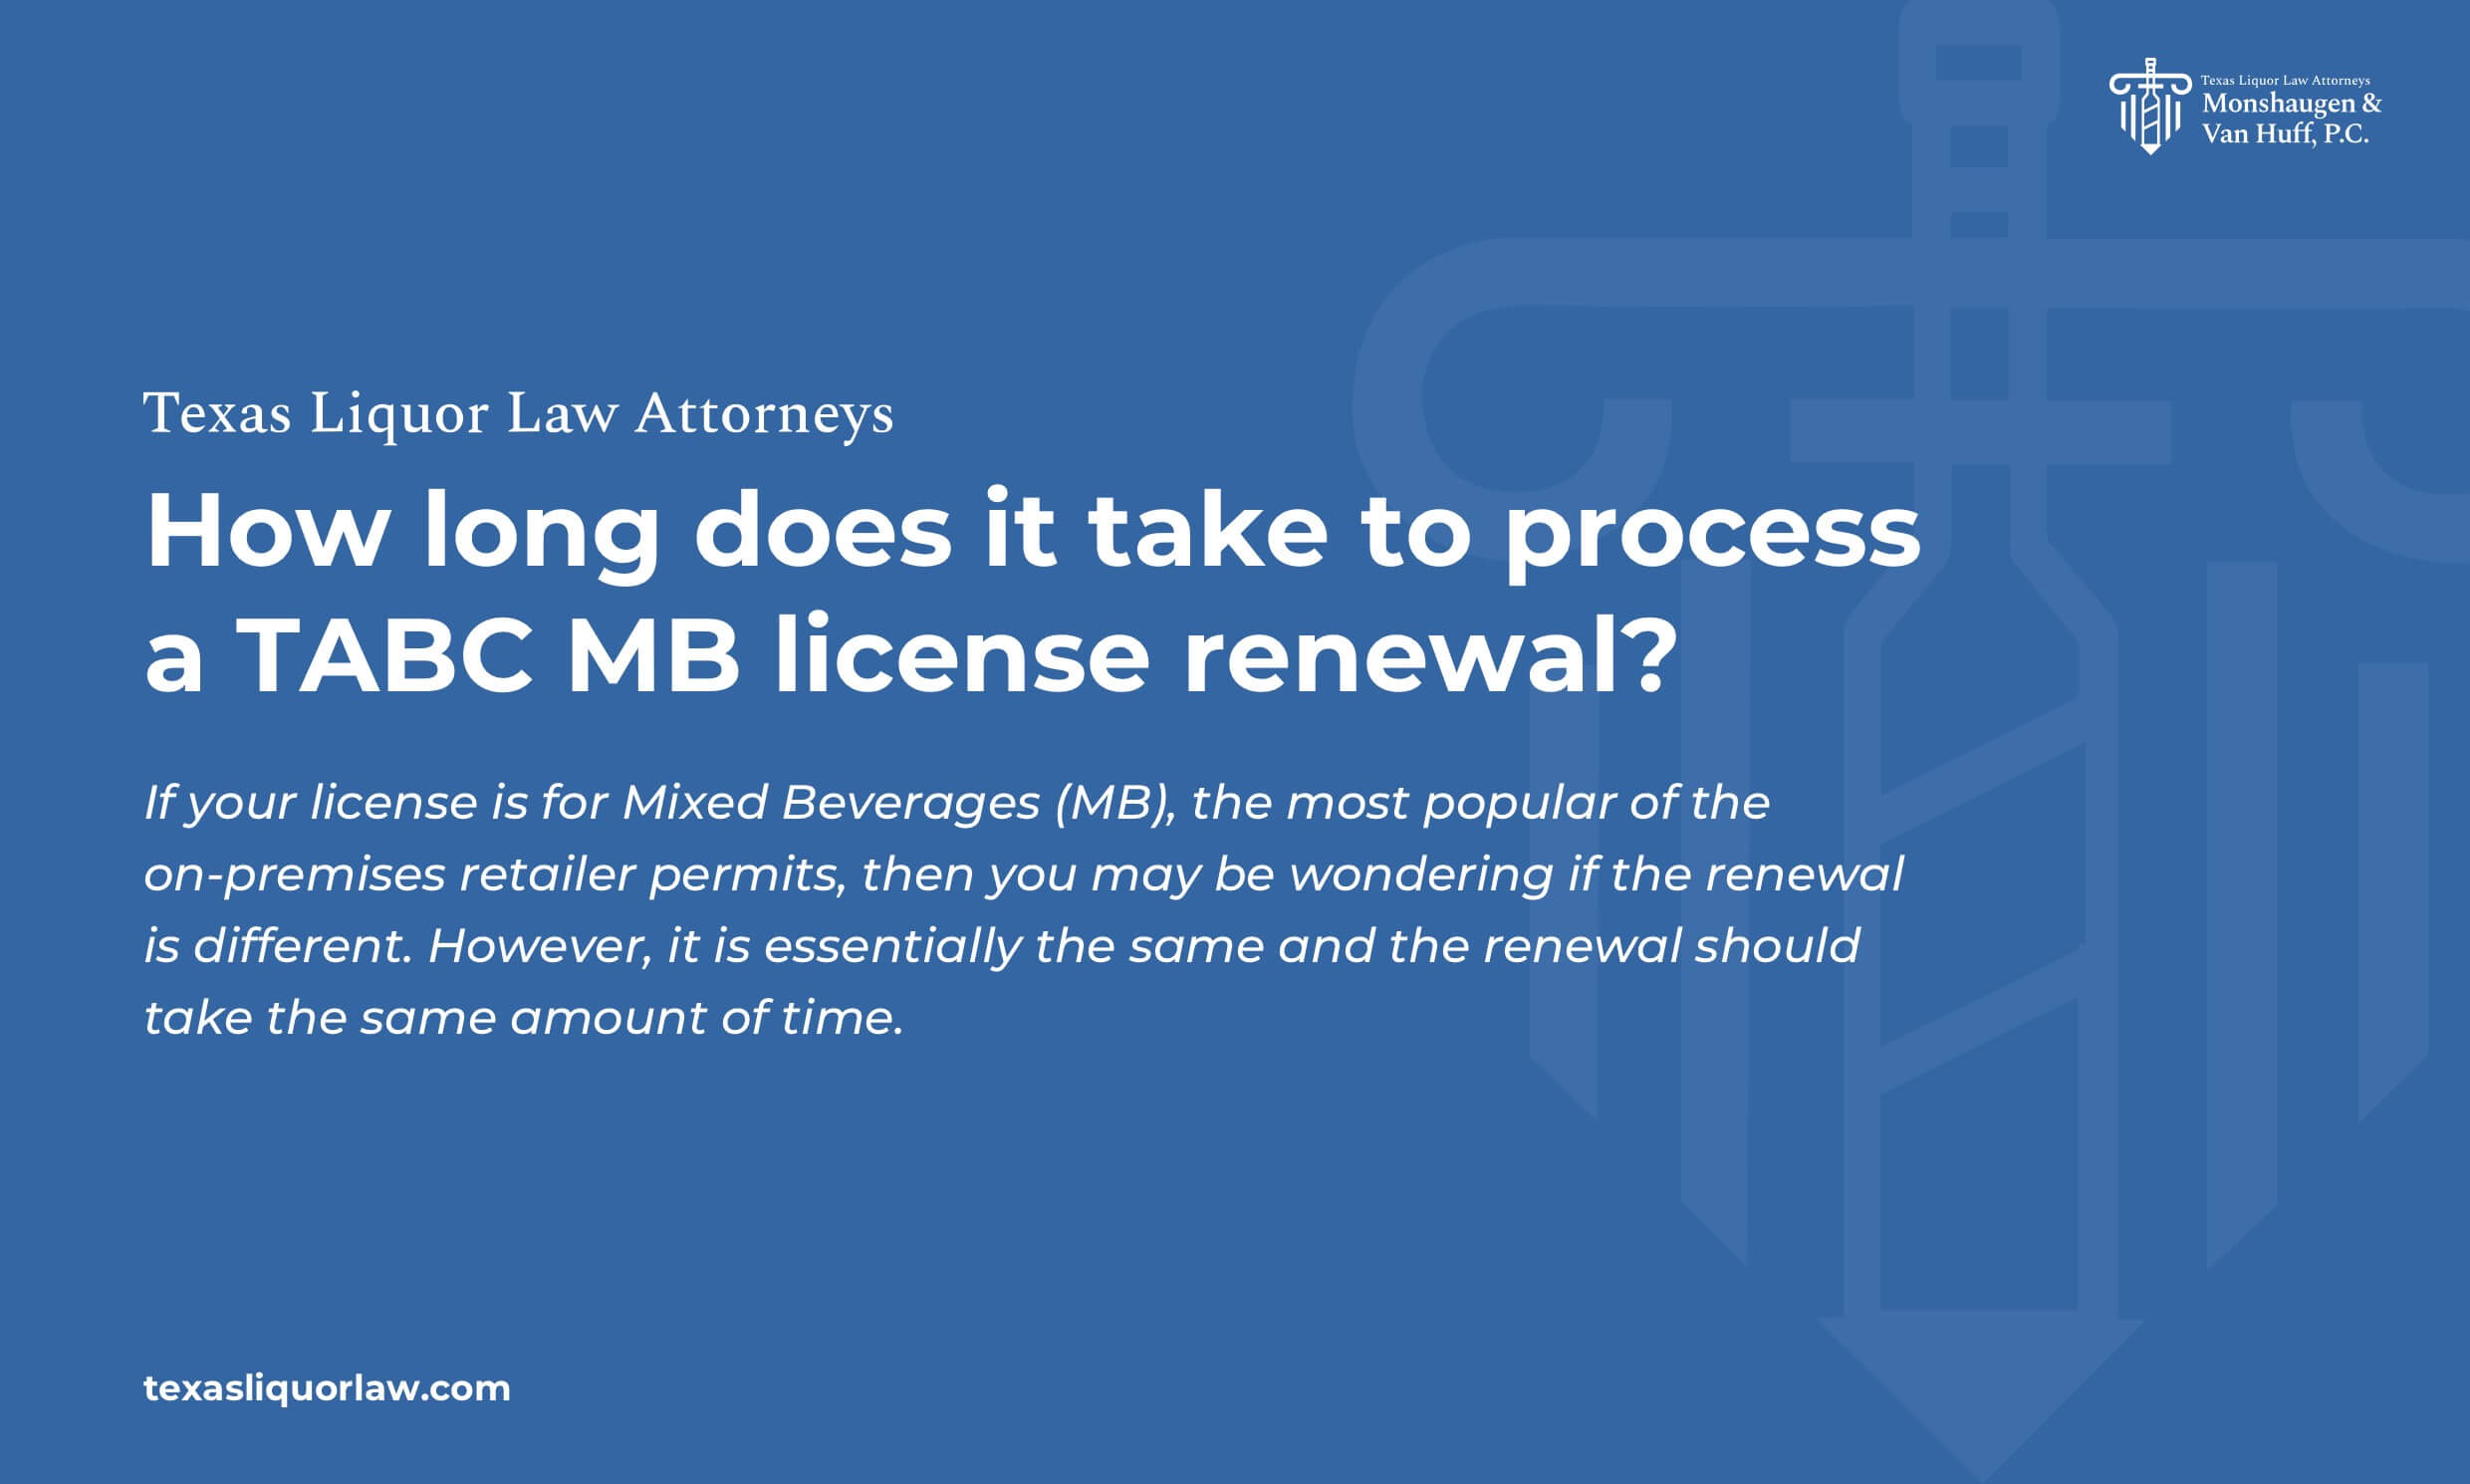 How long does it take to process a TABC license renewal?